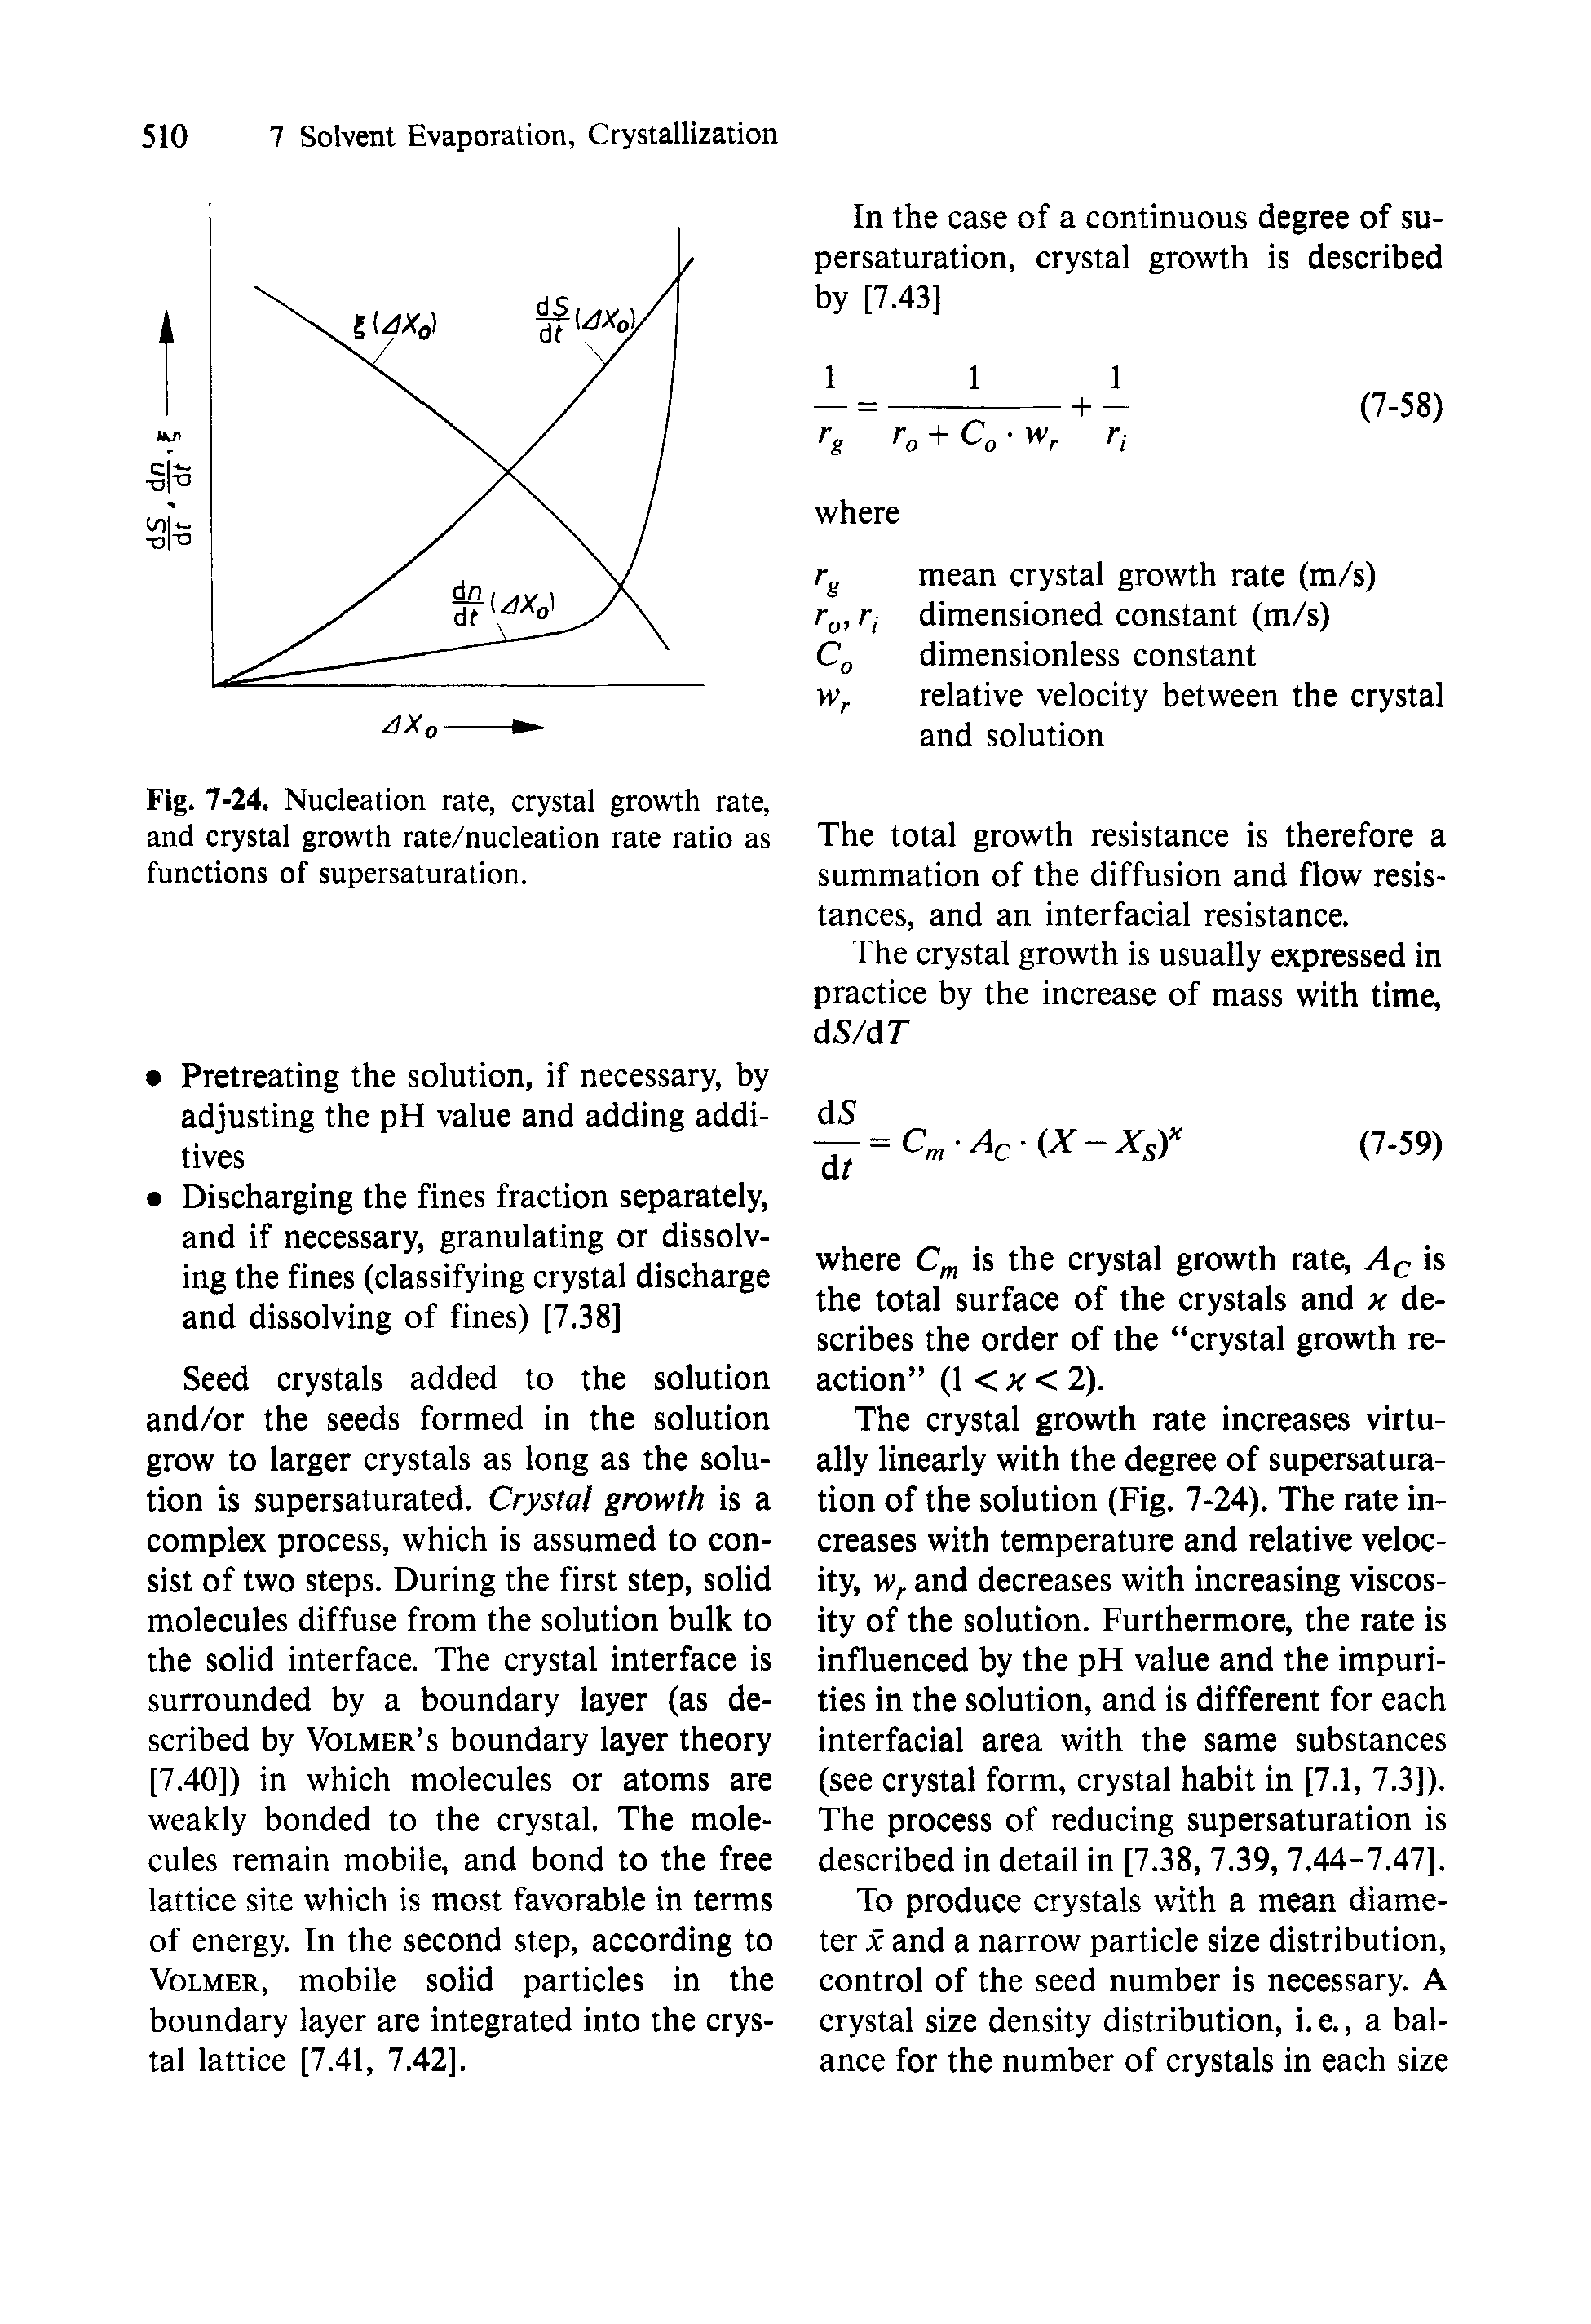 Fig. 7-24. Nucleation rate, crystal growth rate, and crystal growth rate/nucleation rate ratio as functions of supersaturation.